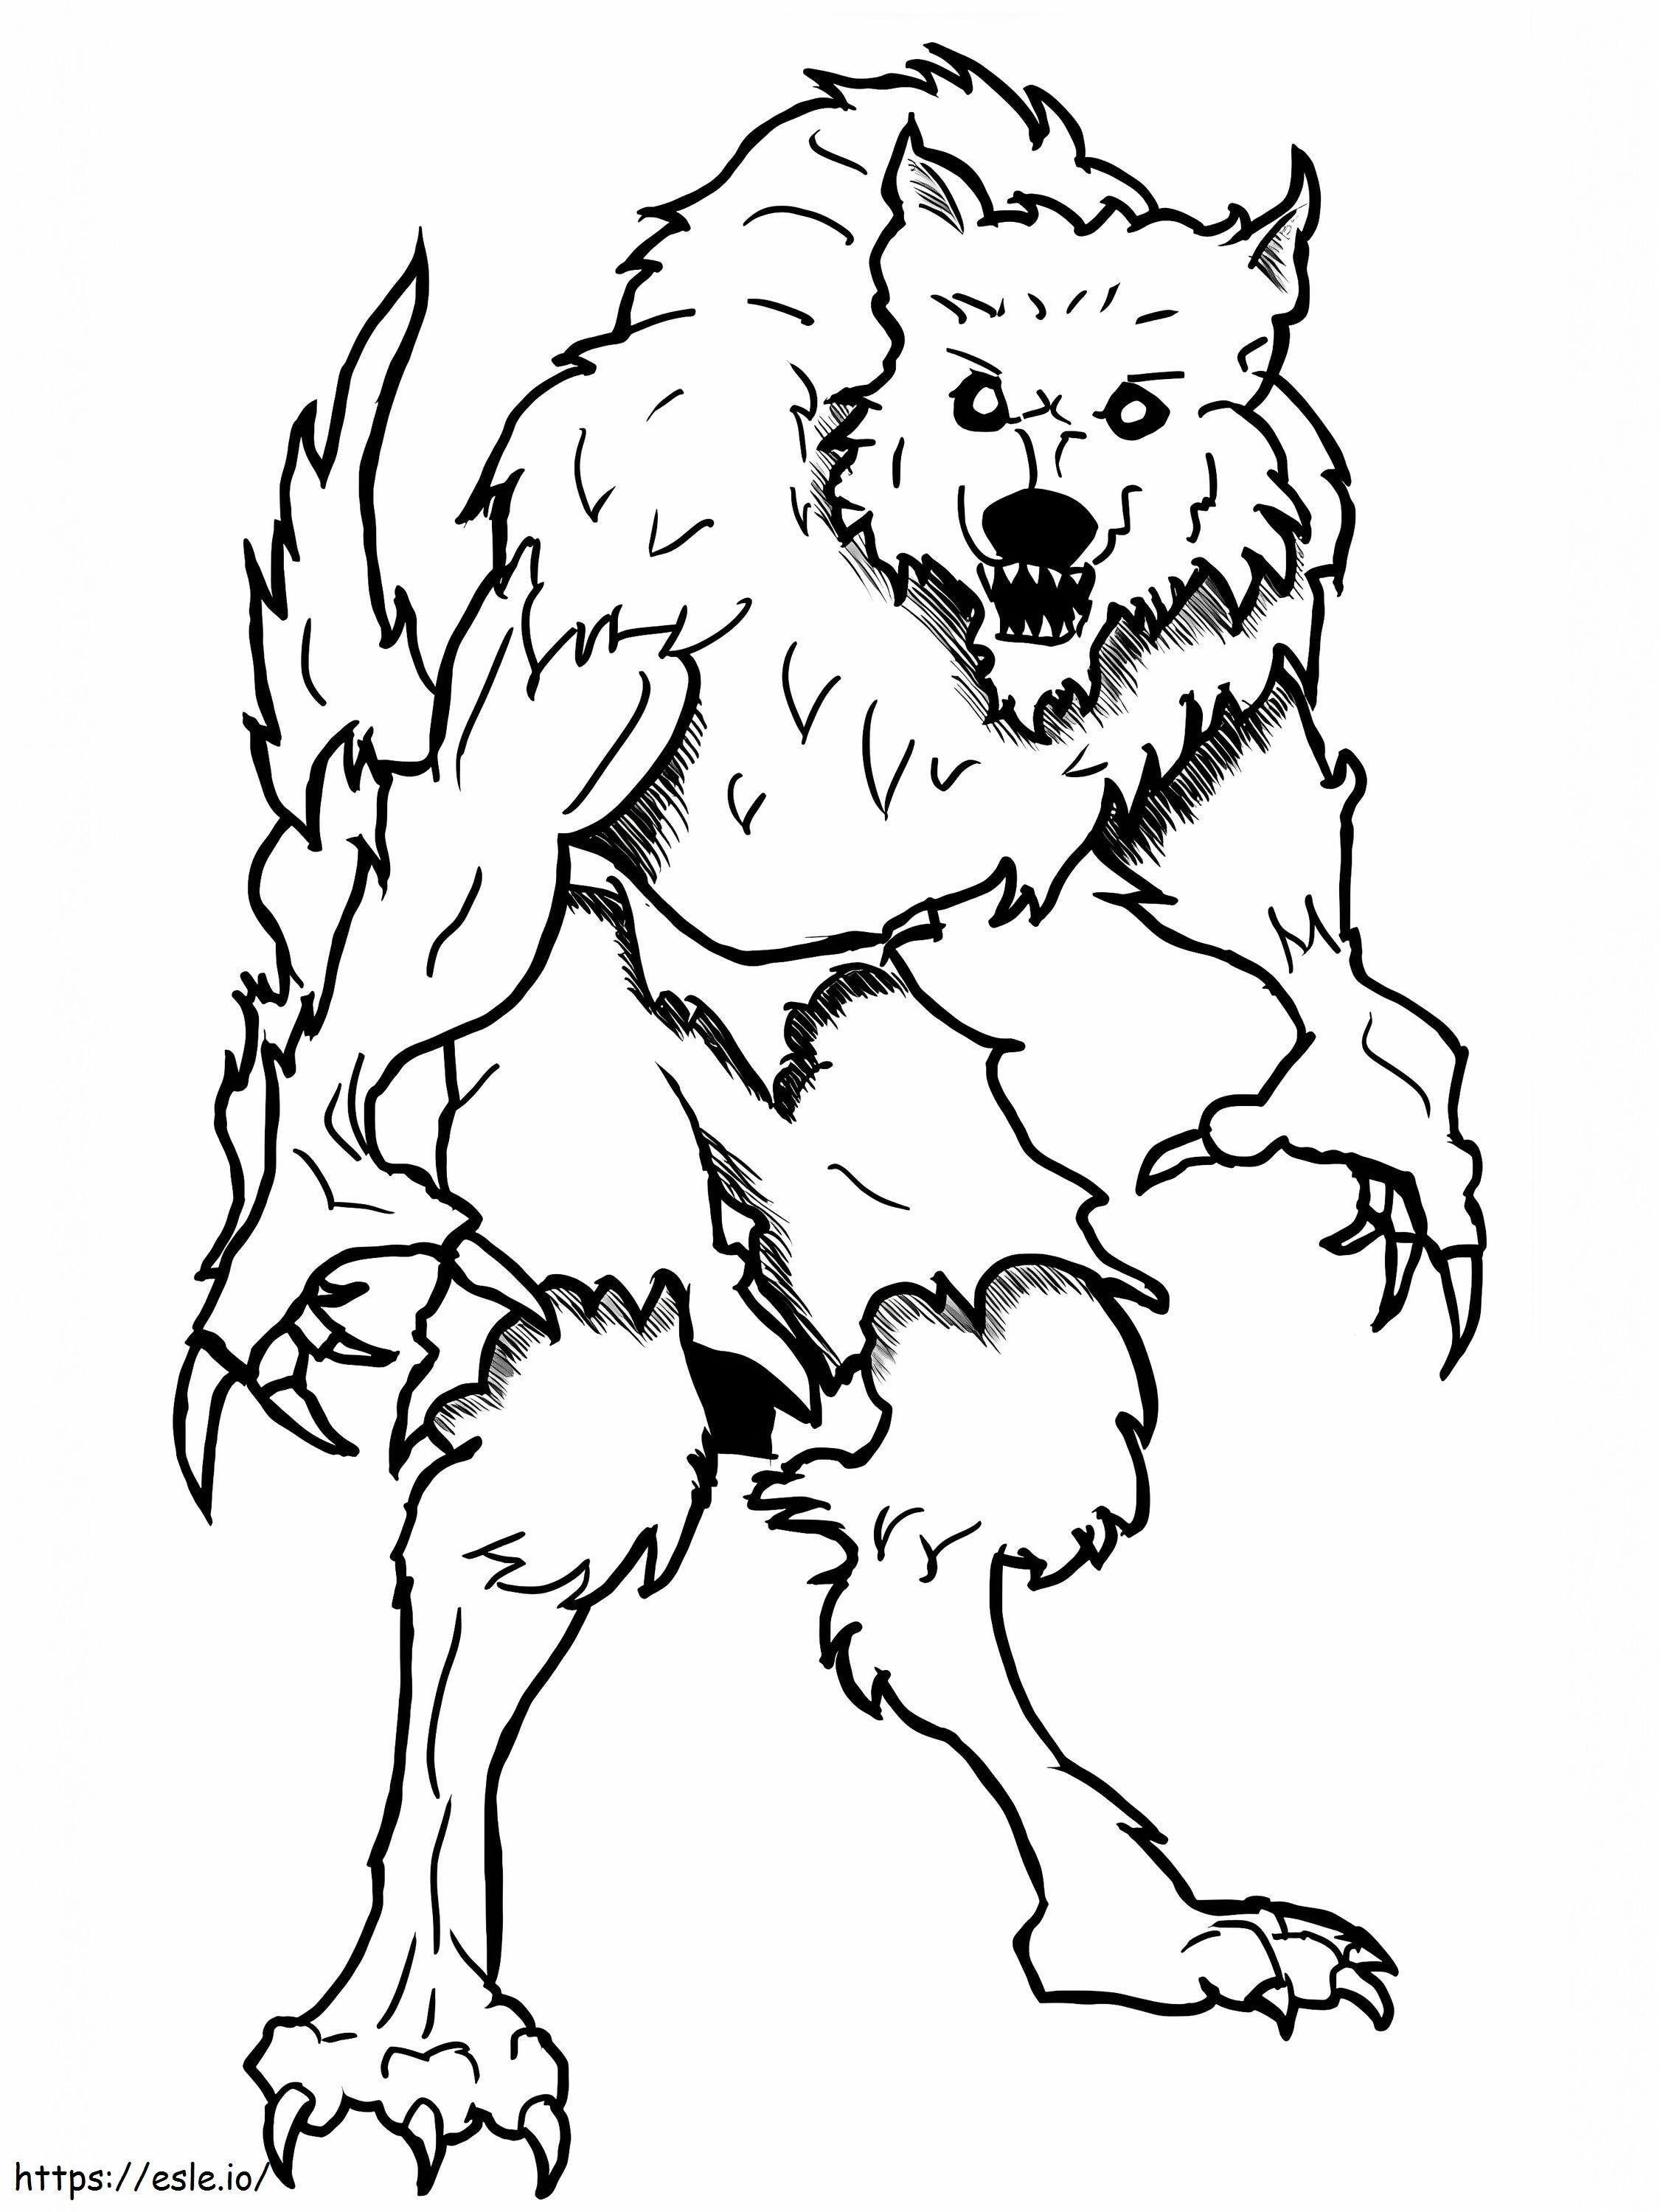 Big Scary Werewolf Coloring Page coloring page